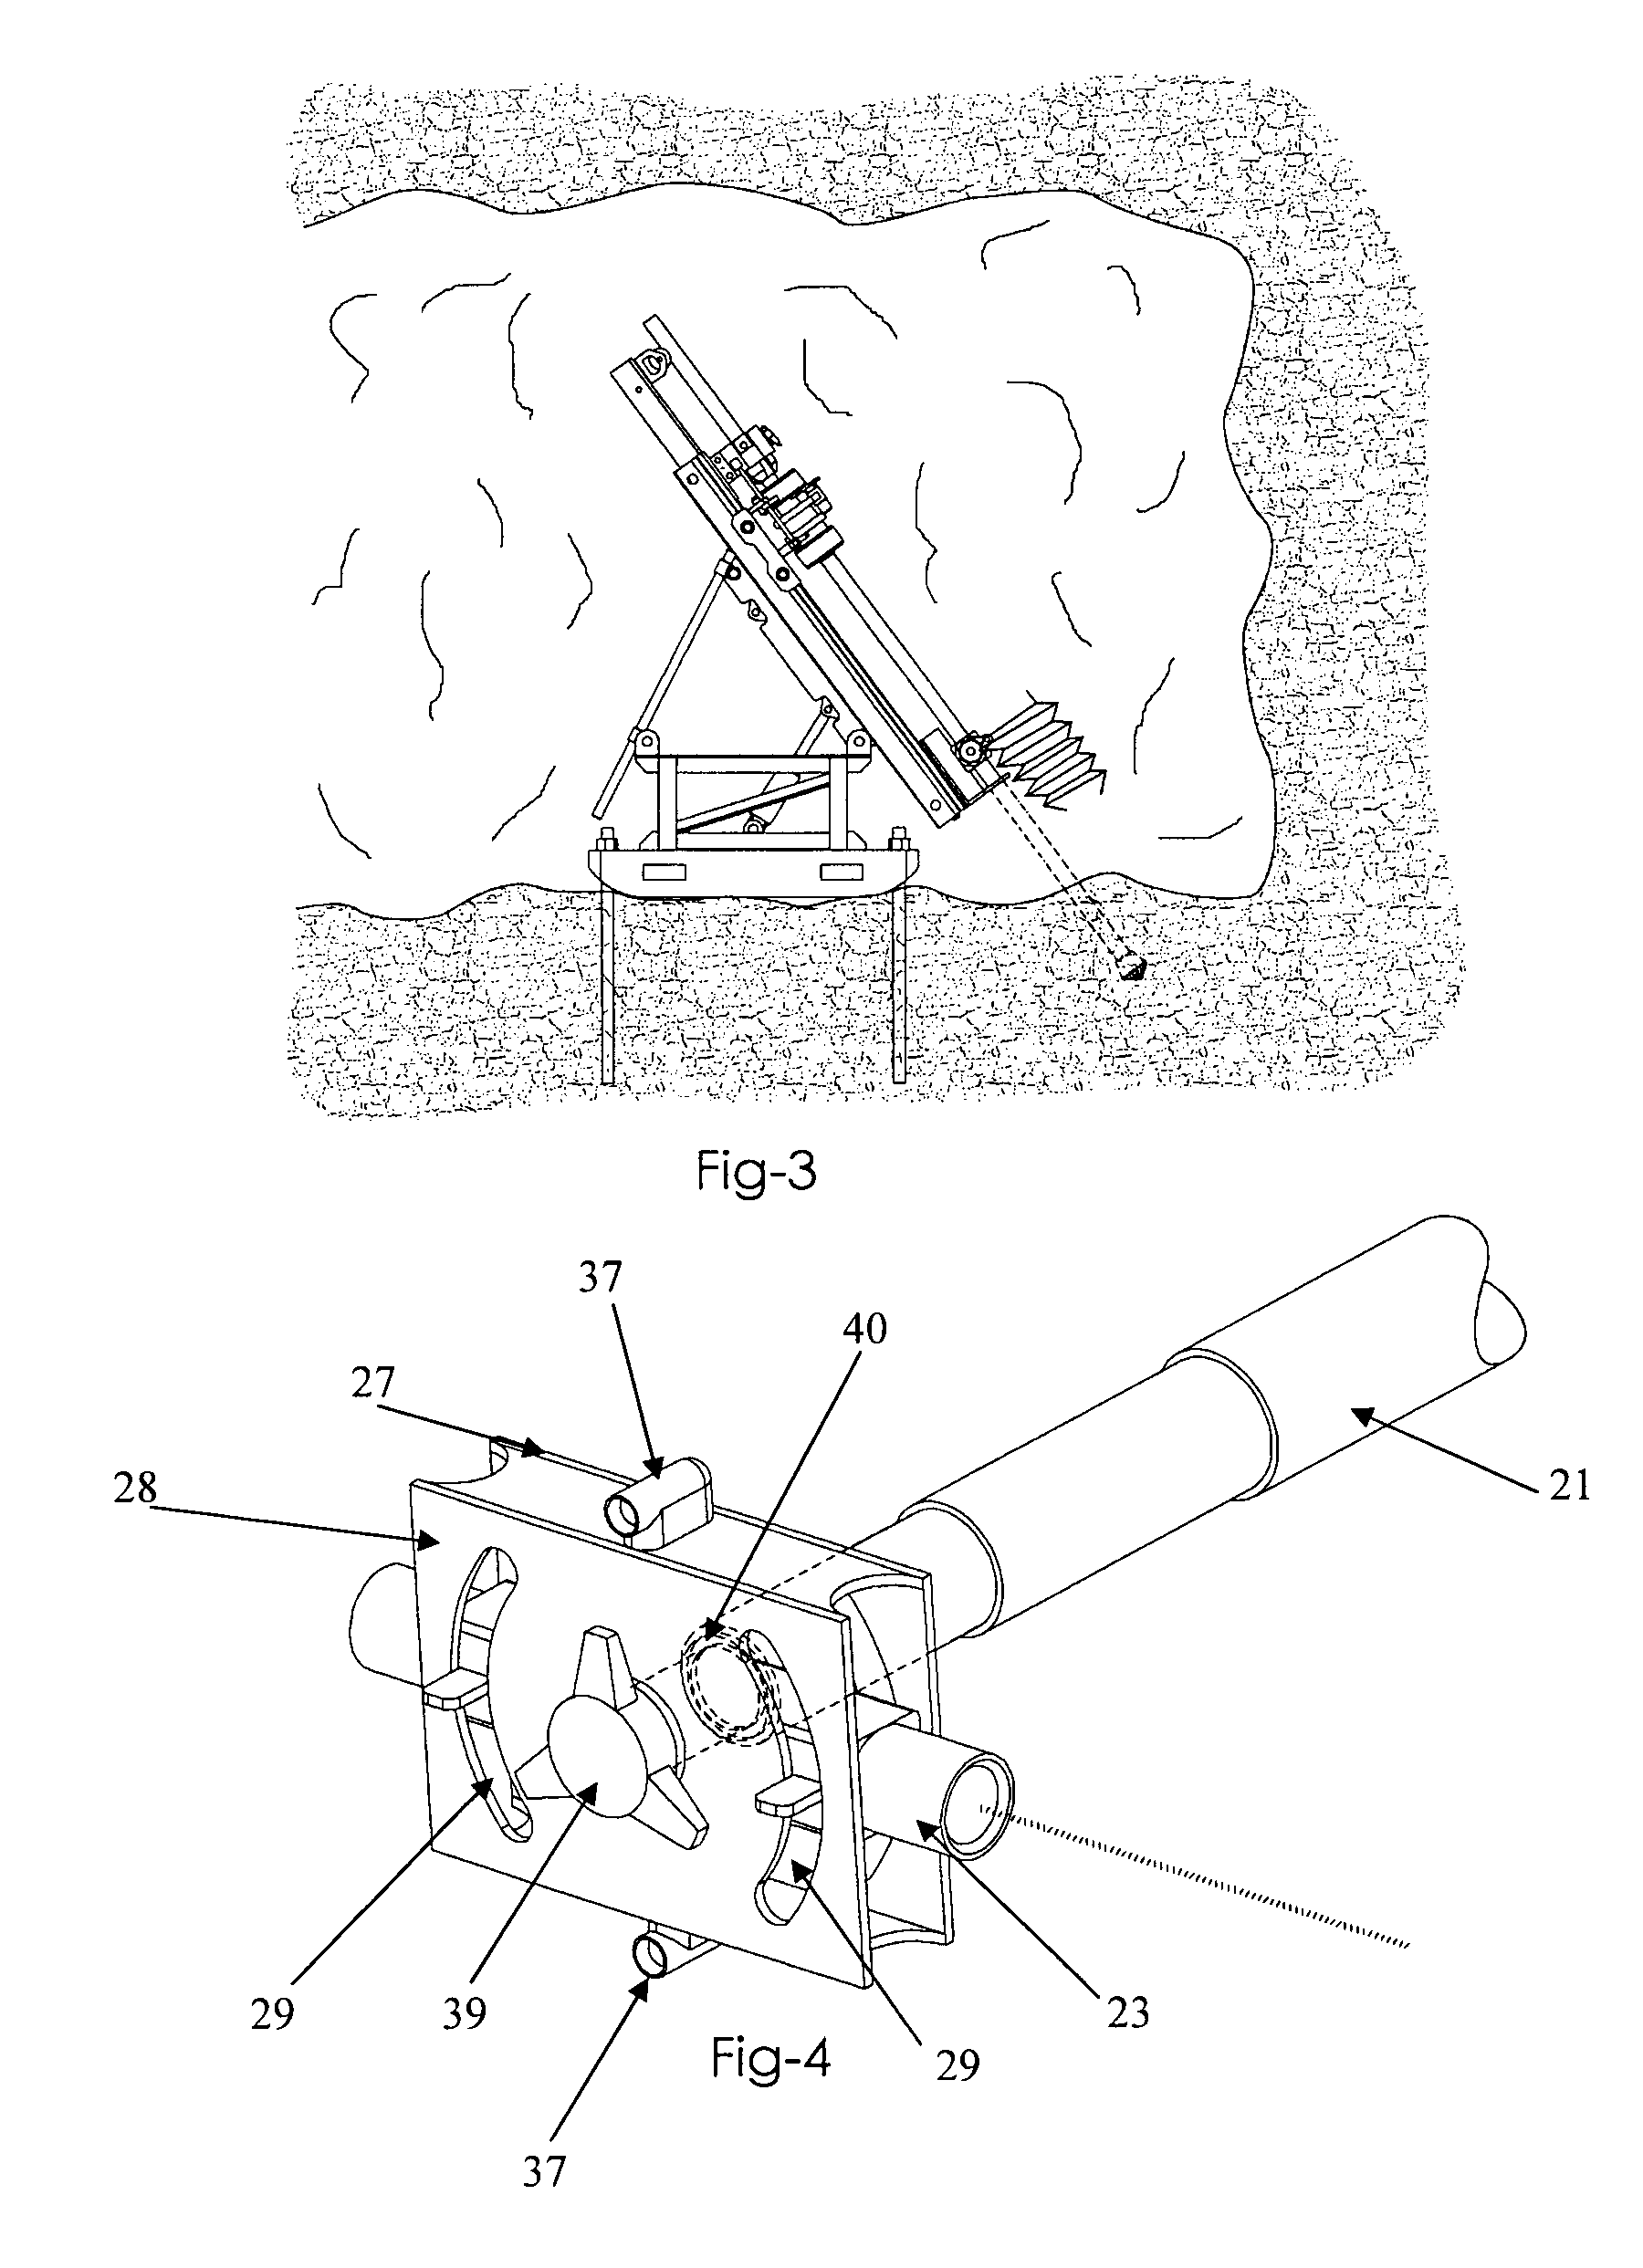 Laser alignment device for use with a drill rig